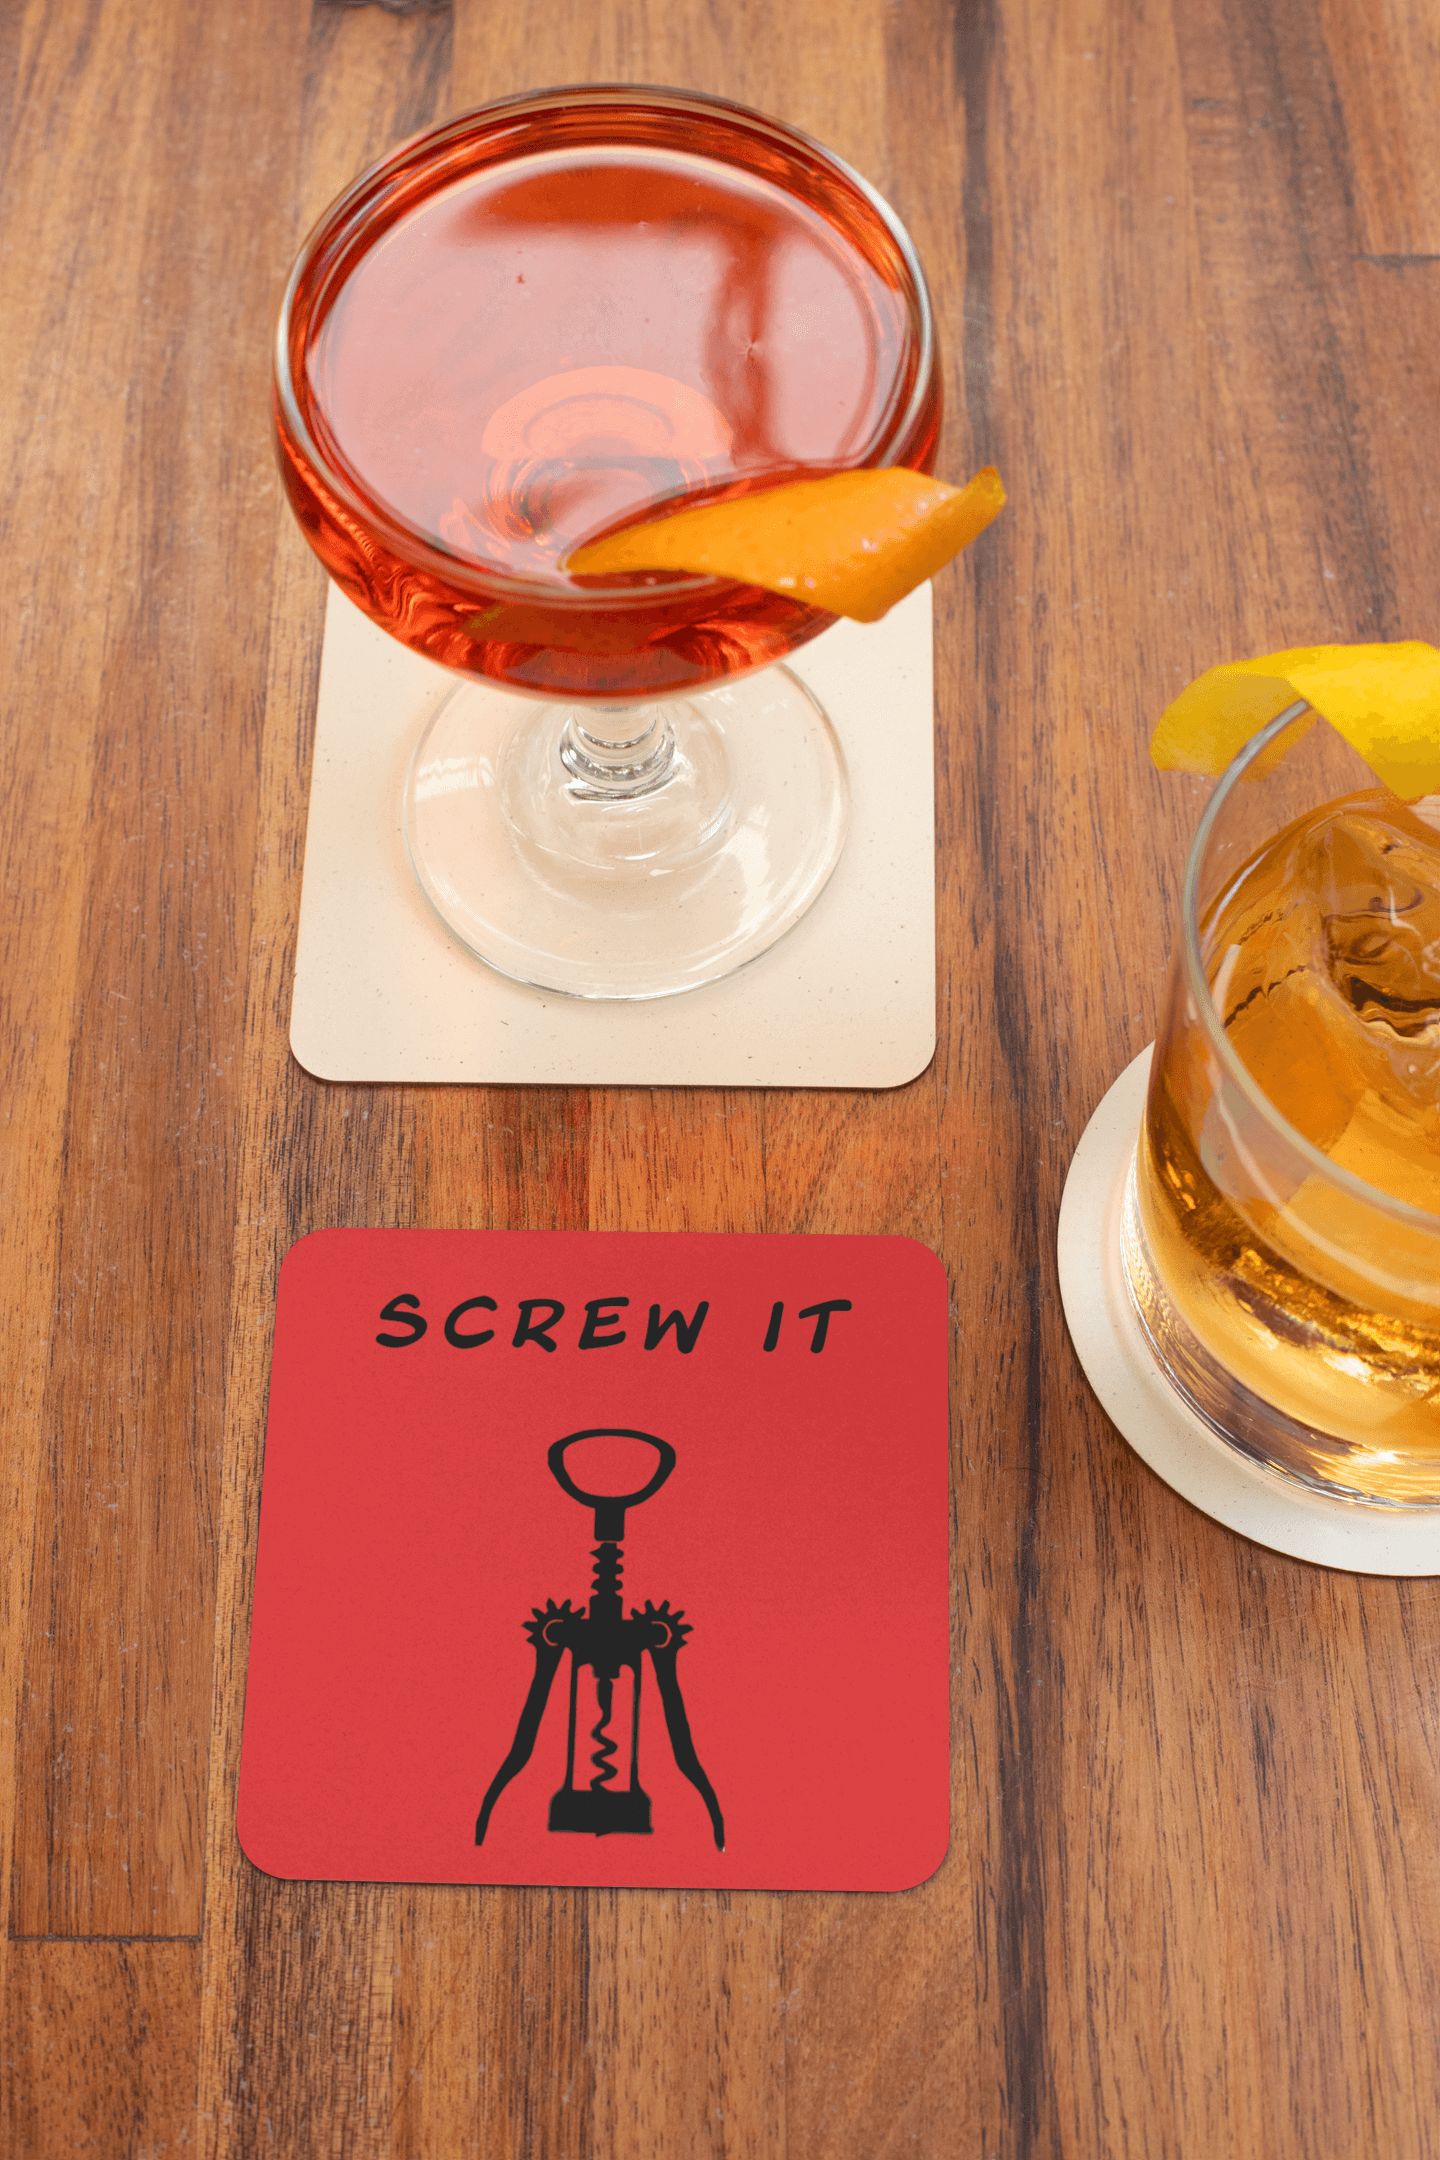 Screw It - Drink coaster adulting American Made Made In America made in USA screw it wine